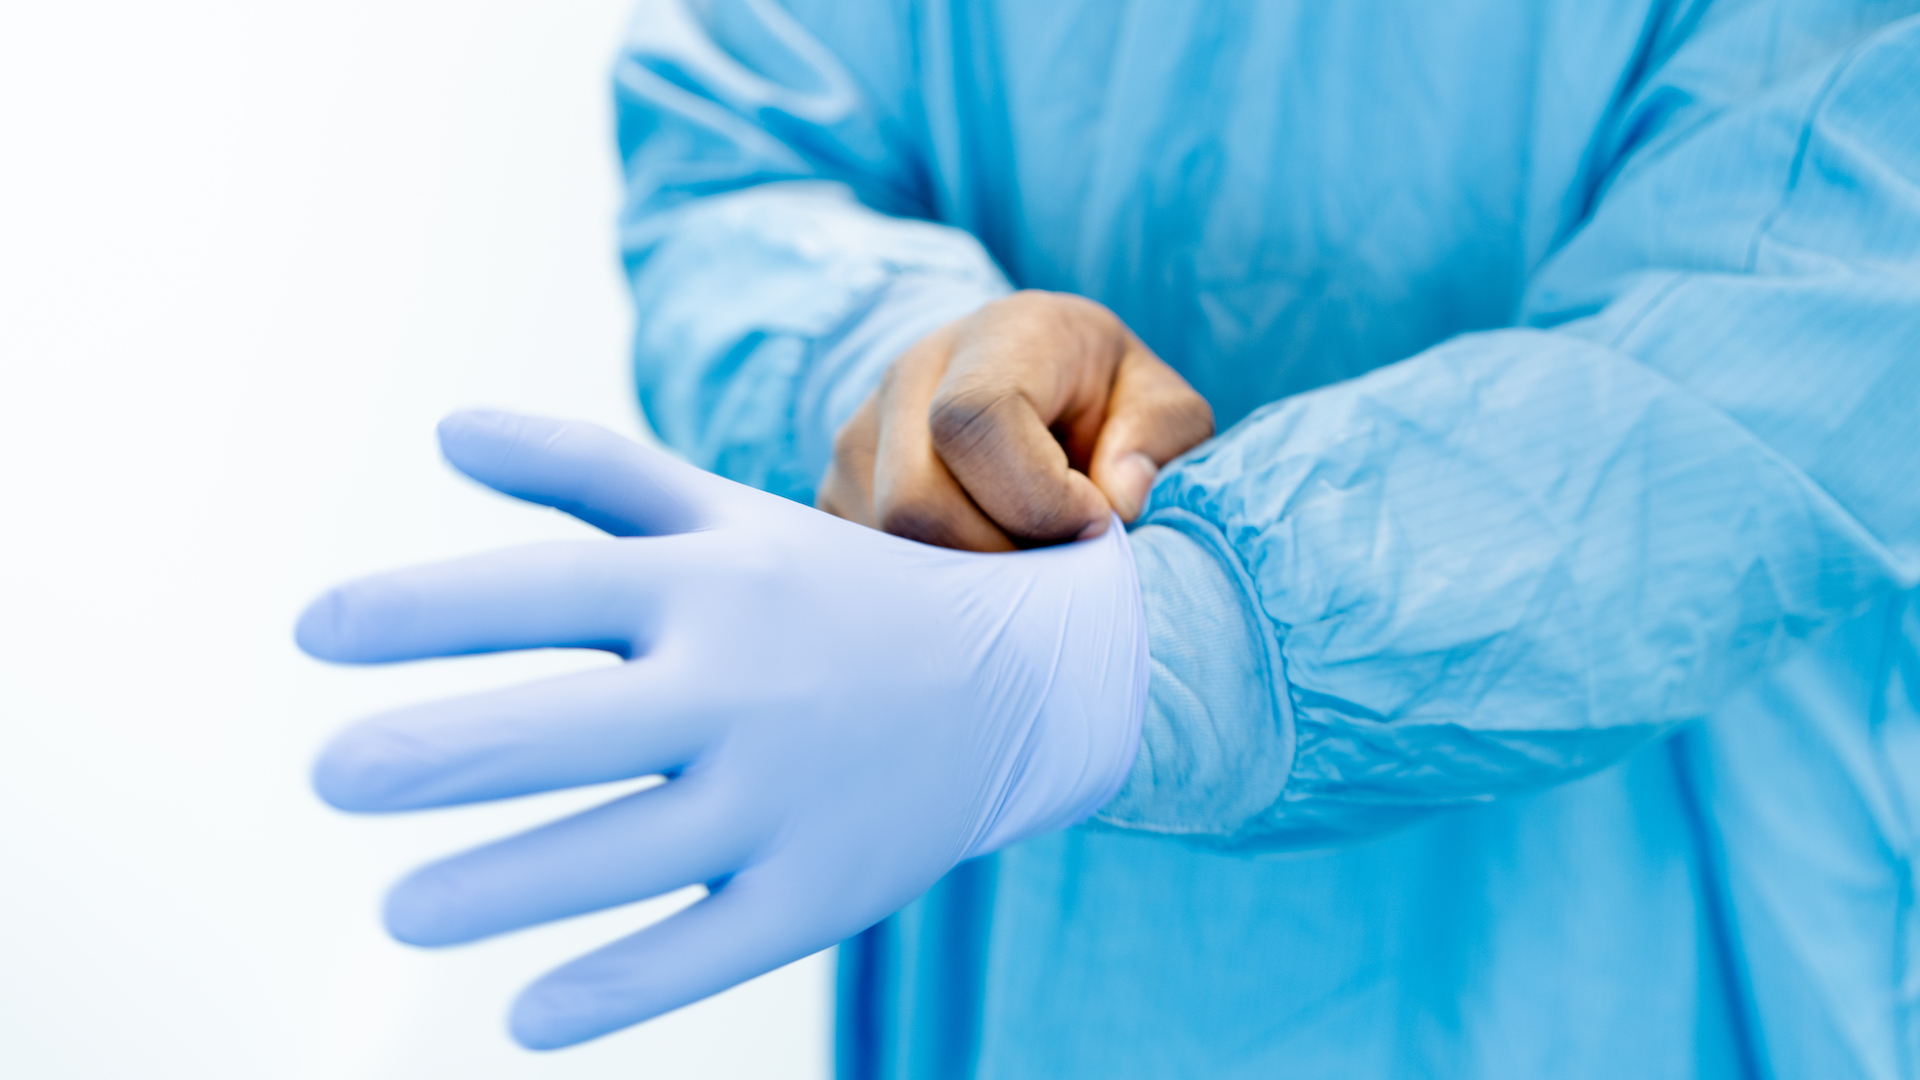 A man pulls a blue glove on to his left hand while wearing a medical gown